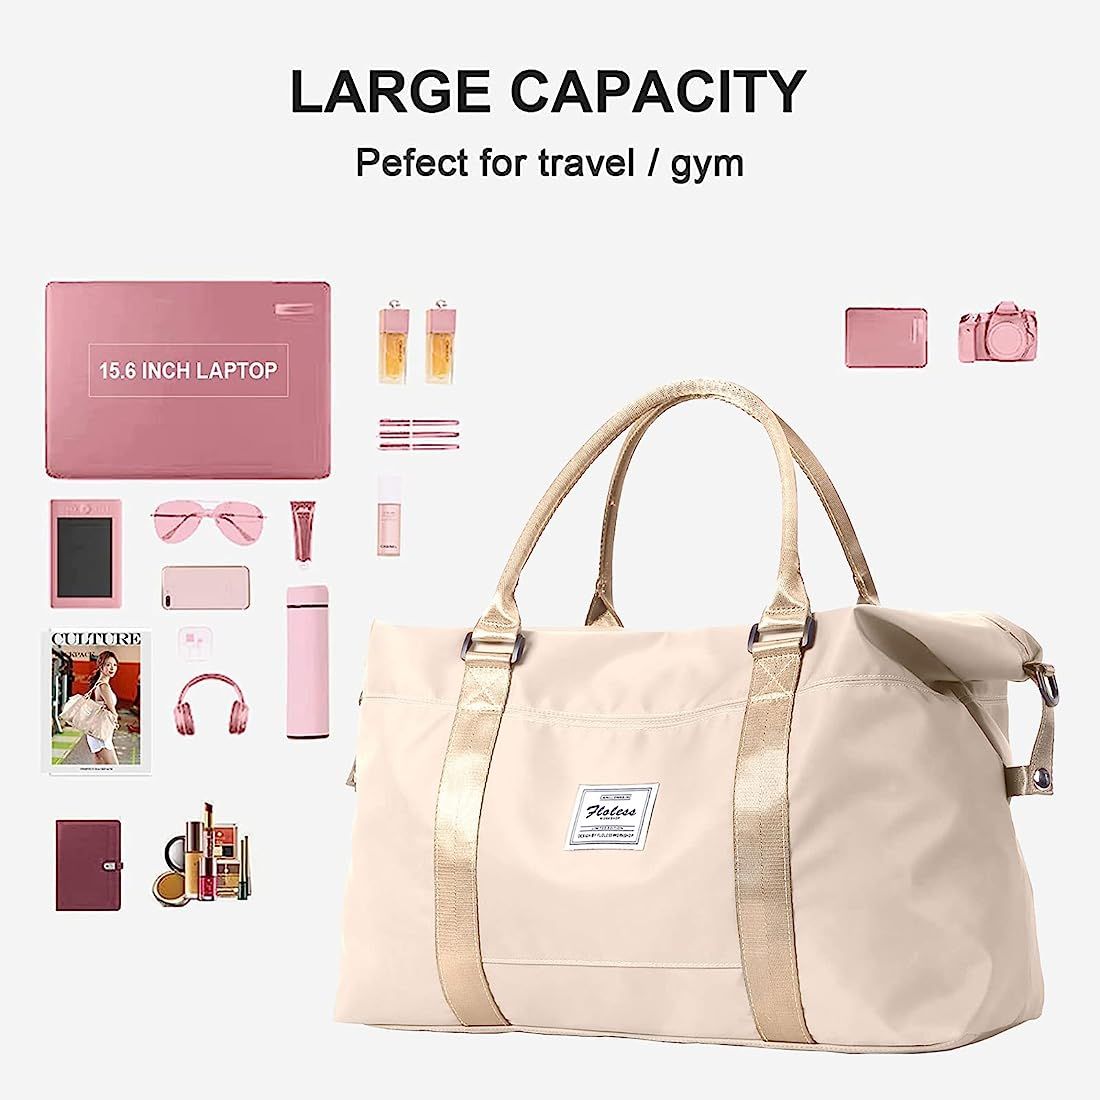 Beige Sport Travel Duffle Bag Large Gym Tote Bag for Women, Weekender Bag Carry on Bag for Airplane, | Amazon (US)